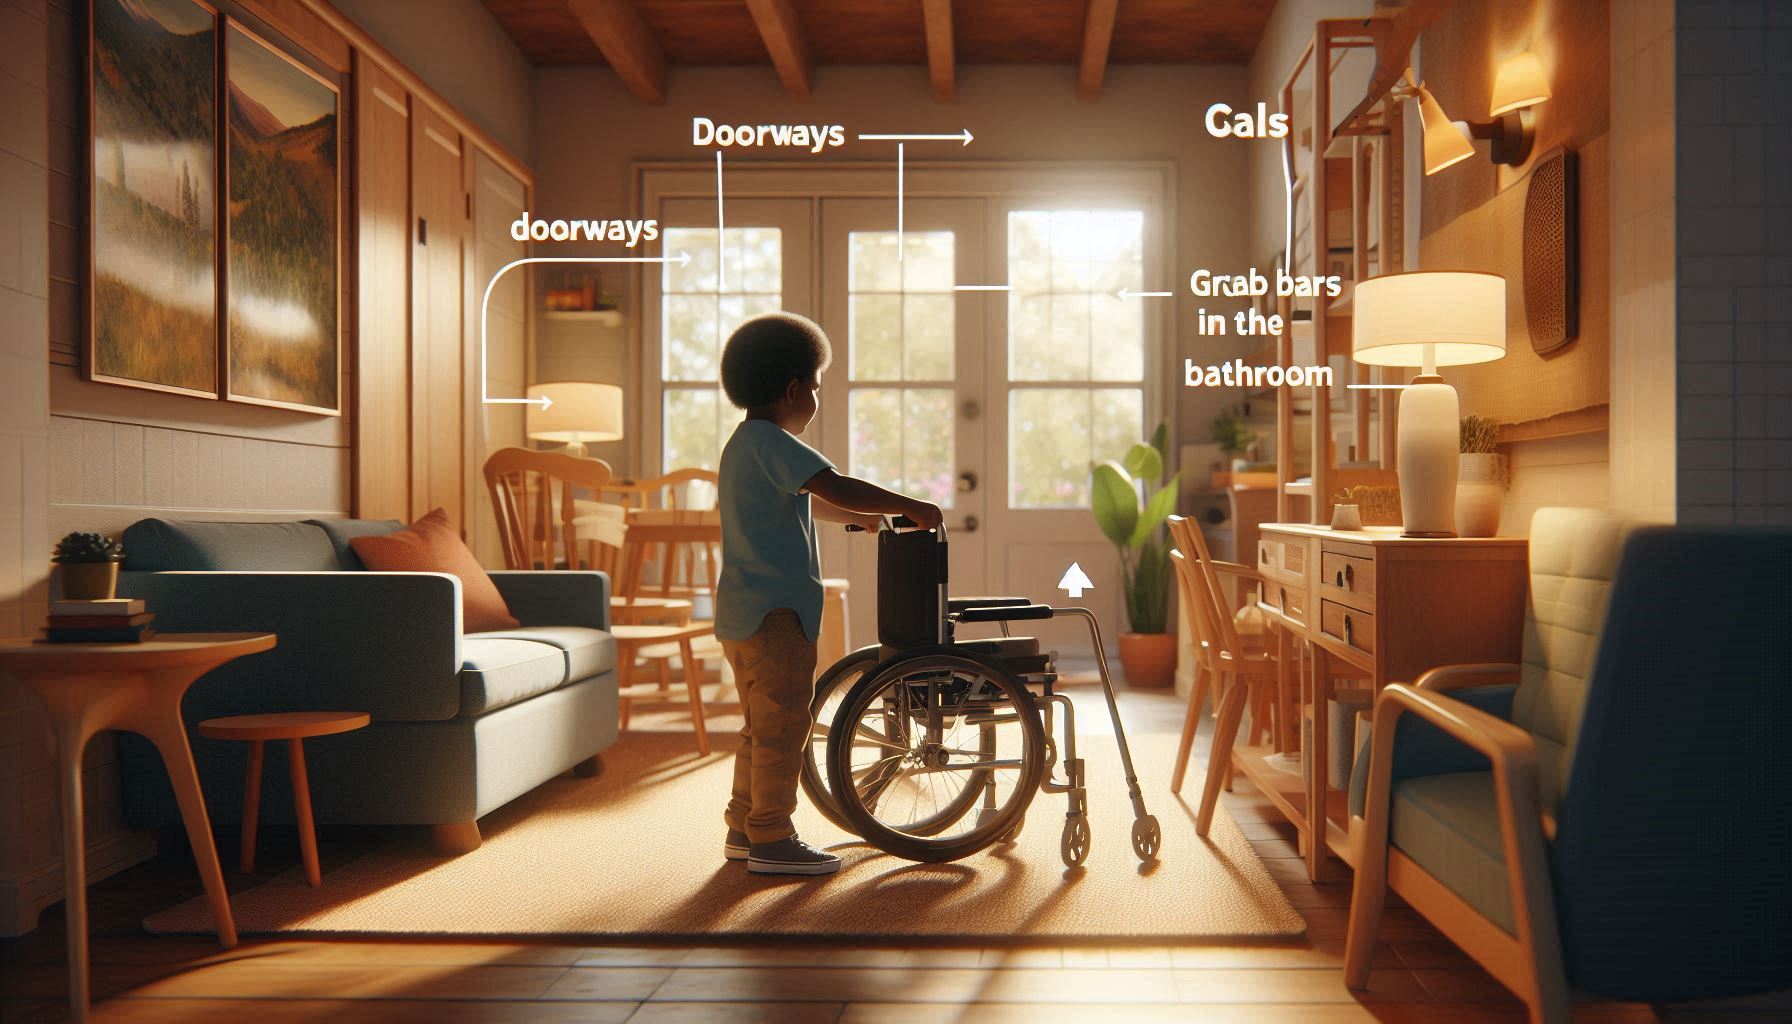 Creating an accessible home